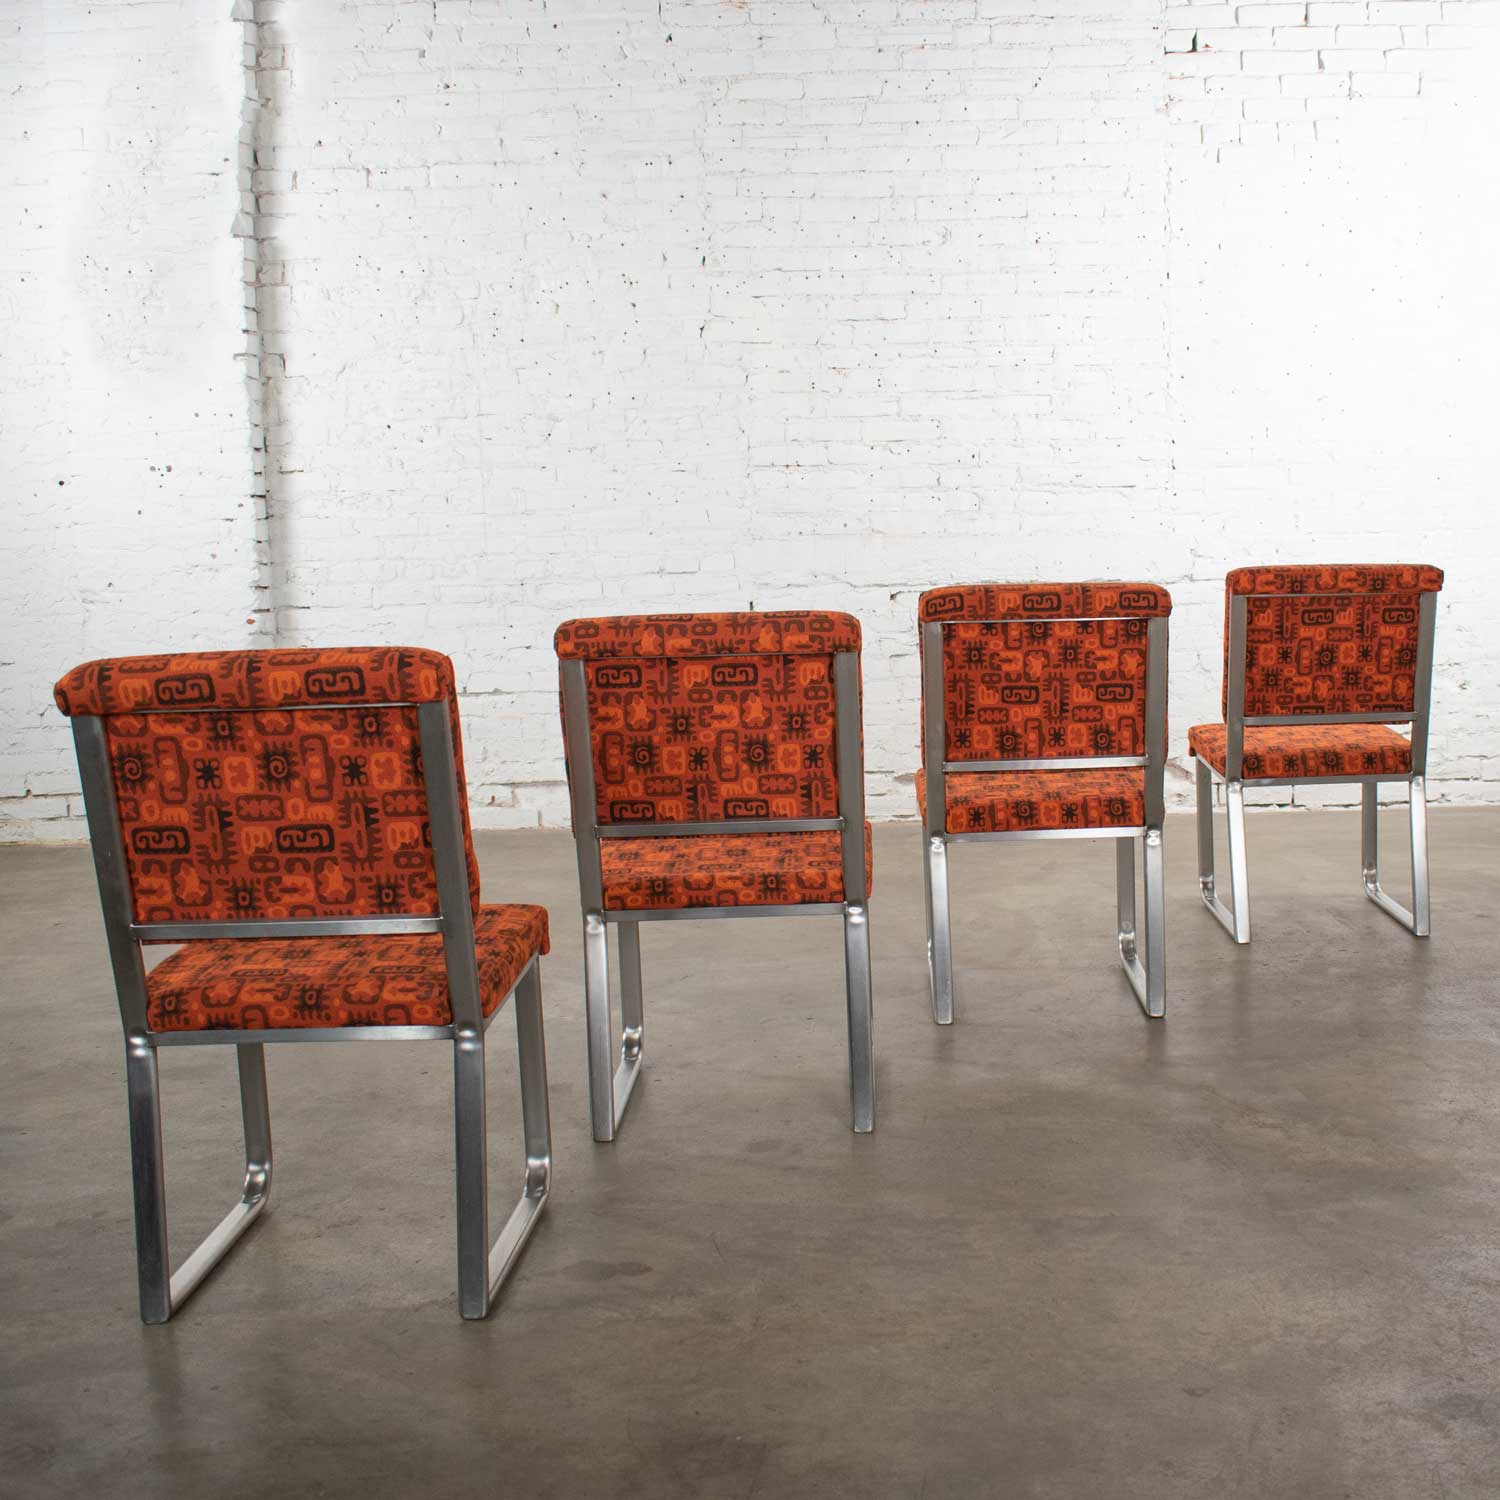 4 Streamline Modern Railroad Dining Car Chairs in Stainless Steel & Orange Abstract Upholstery